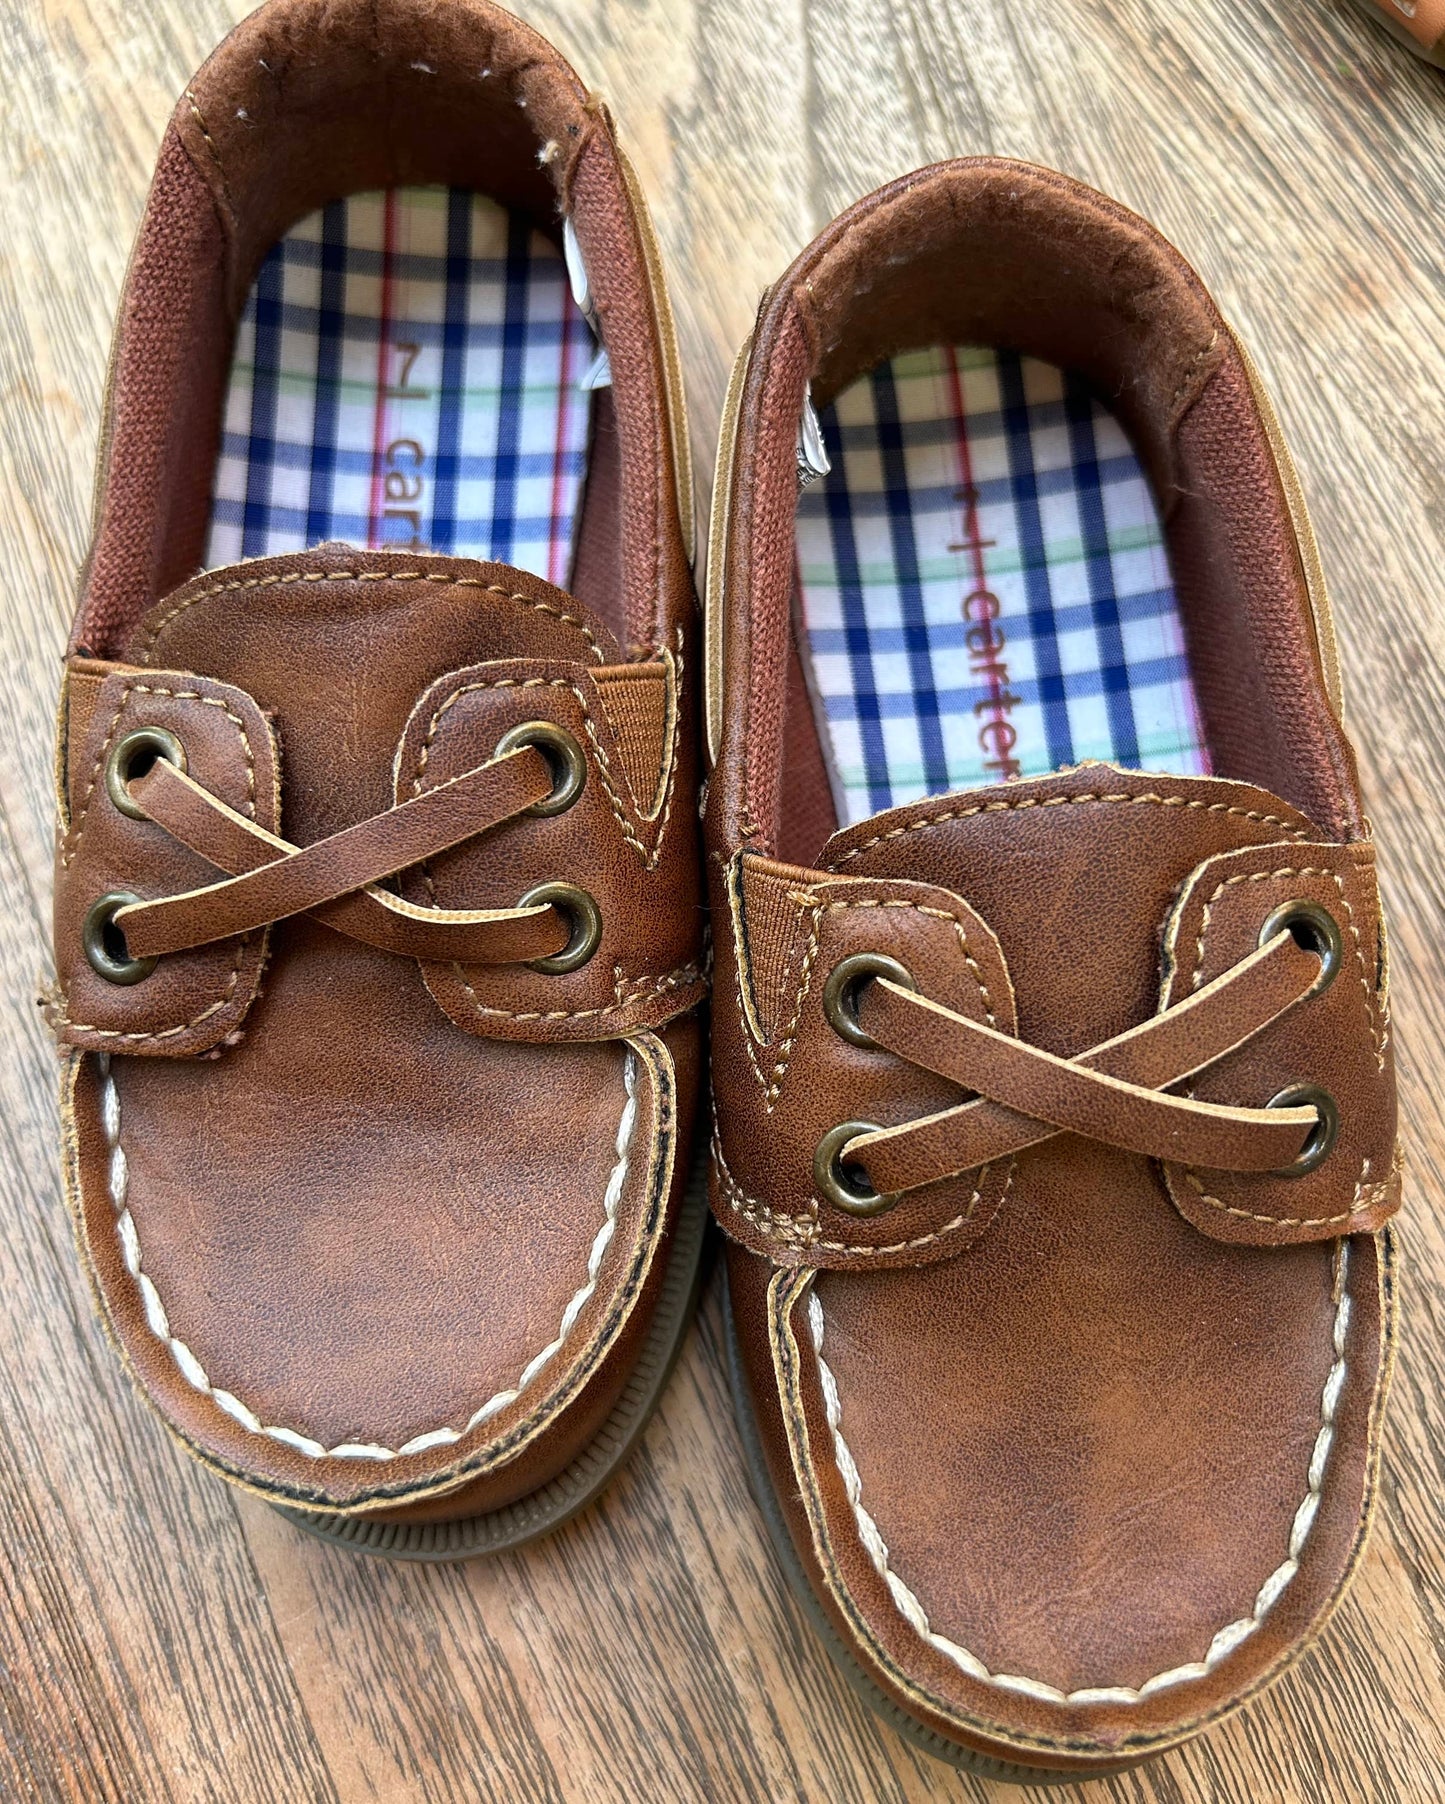 Brown Boat Shoes (Pre-Loved) Baby - US Size 7 / Euro size 23 - Carter's